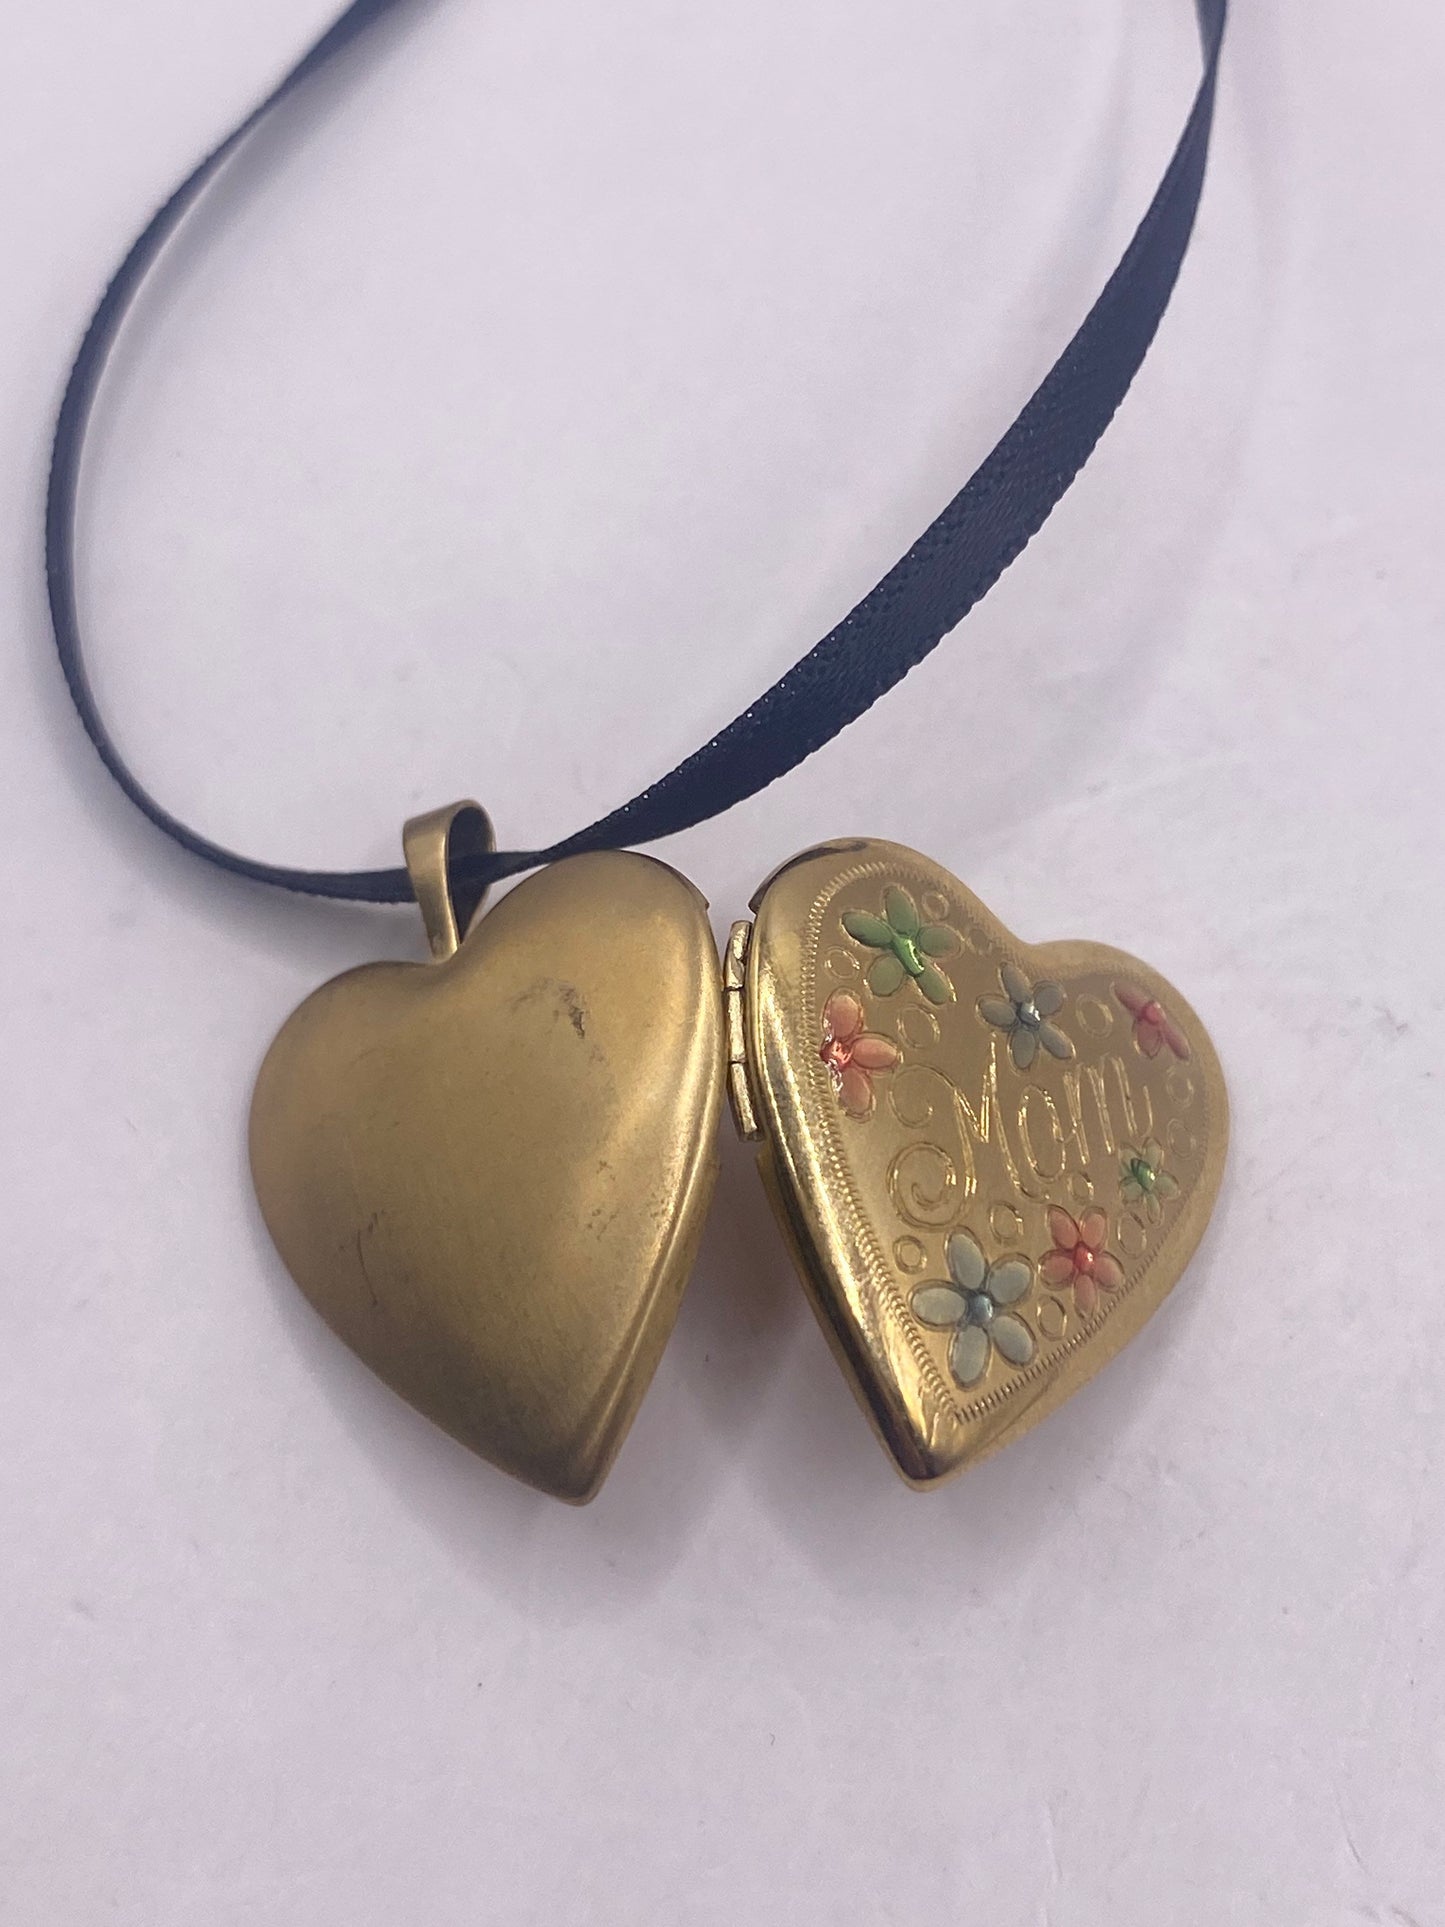 Vintage Gold Locket | Tiny Heart 9k Gold Filled Pendant Photo Memory Charm Engraved "Mom" Flowers | Choker Necklace